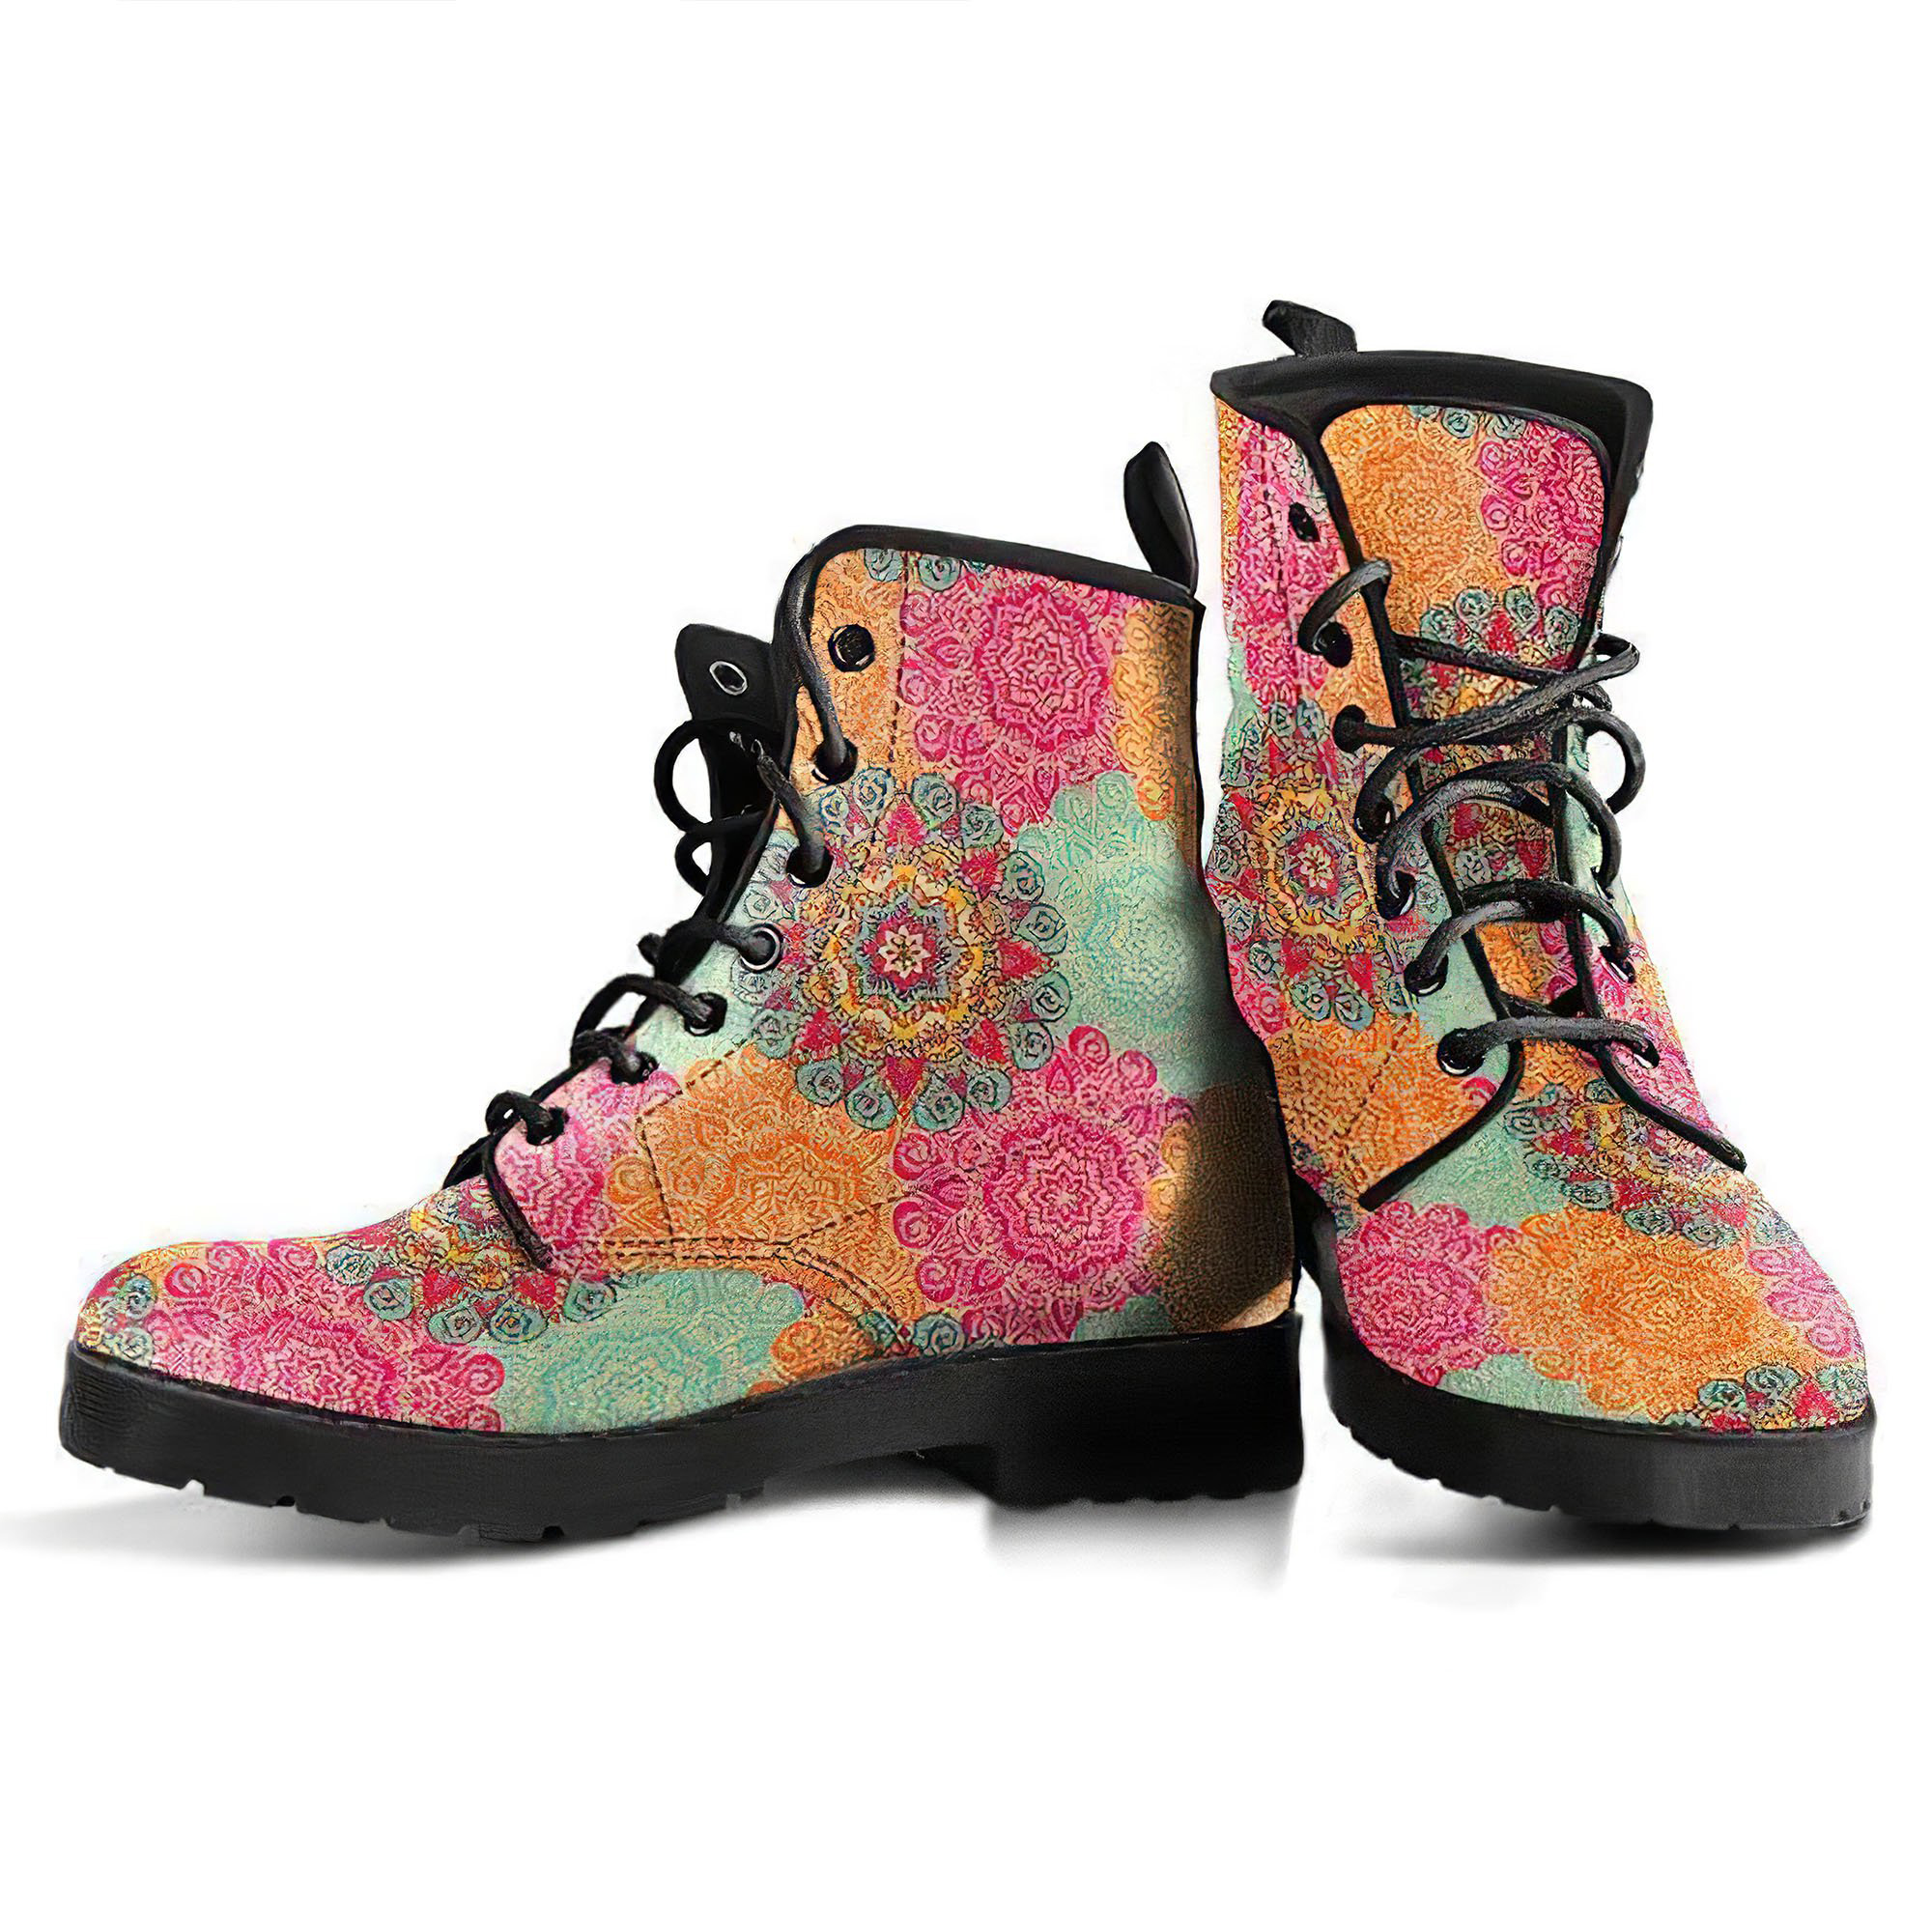 henna-charka-handcrafted-boots-limited-edition-gp-main.jpg